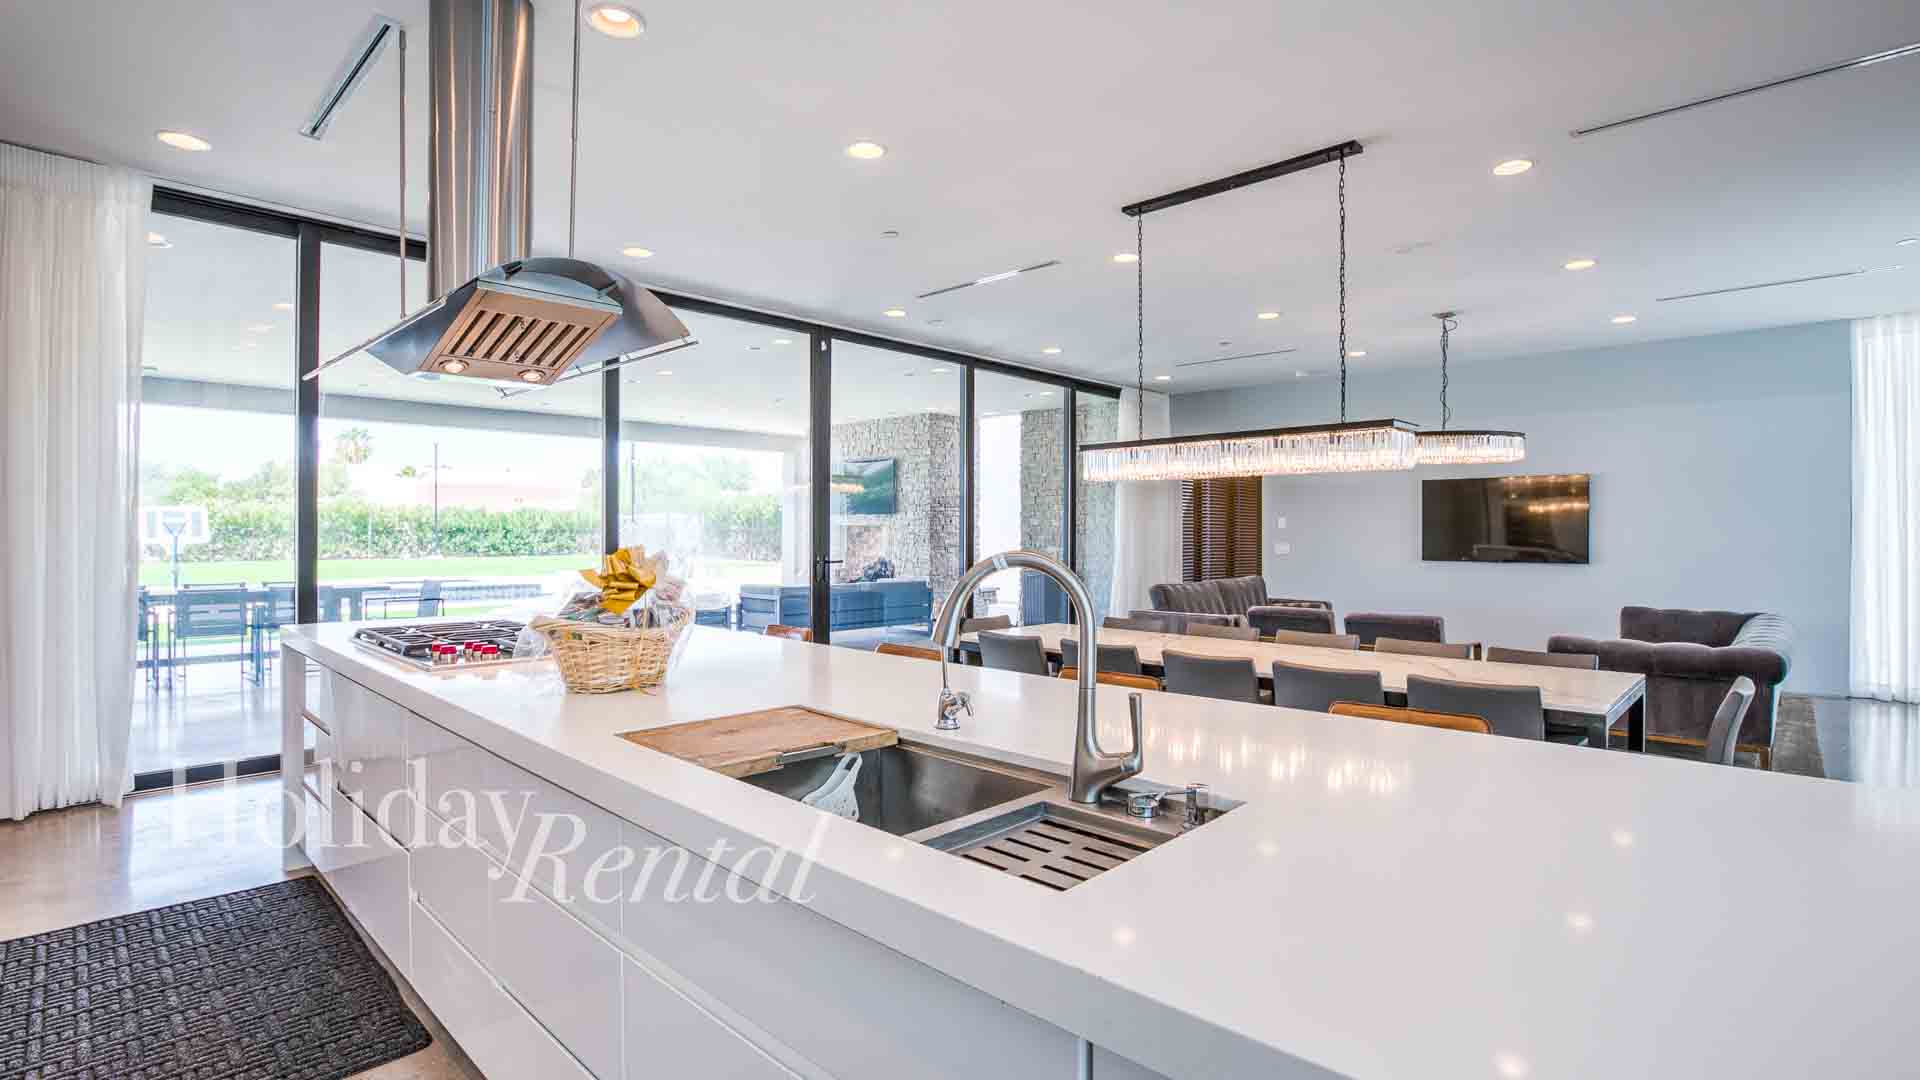 luxury vacation rental kitchen and dining